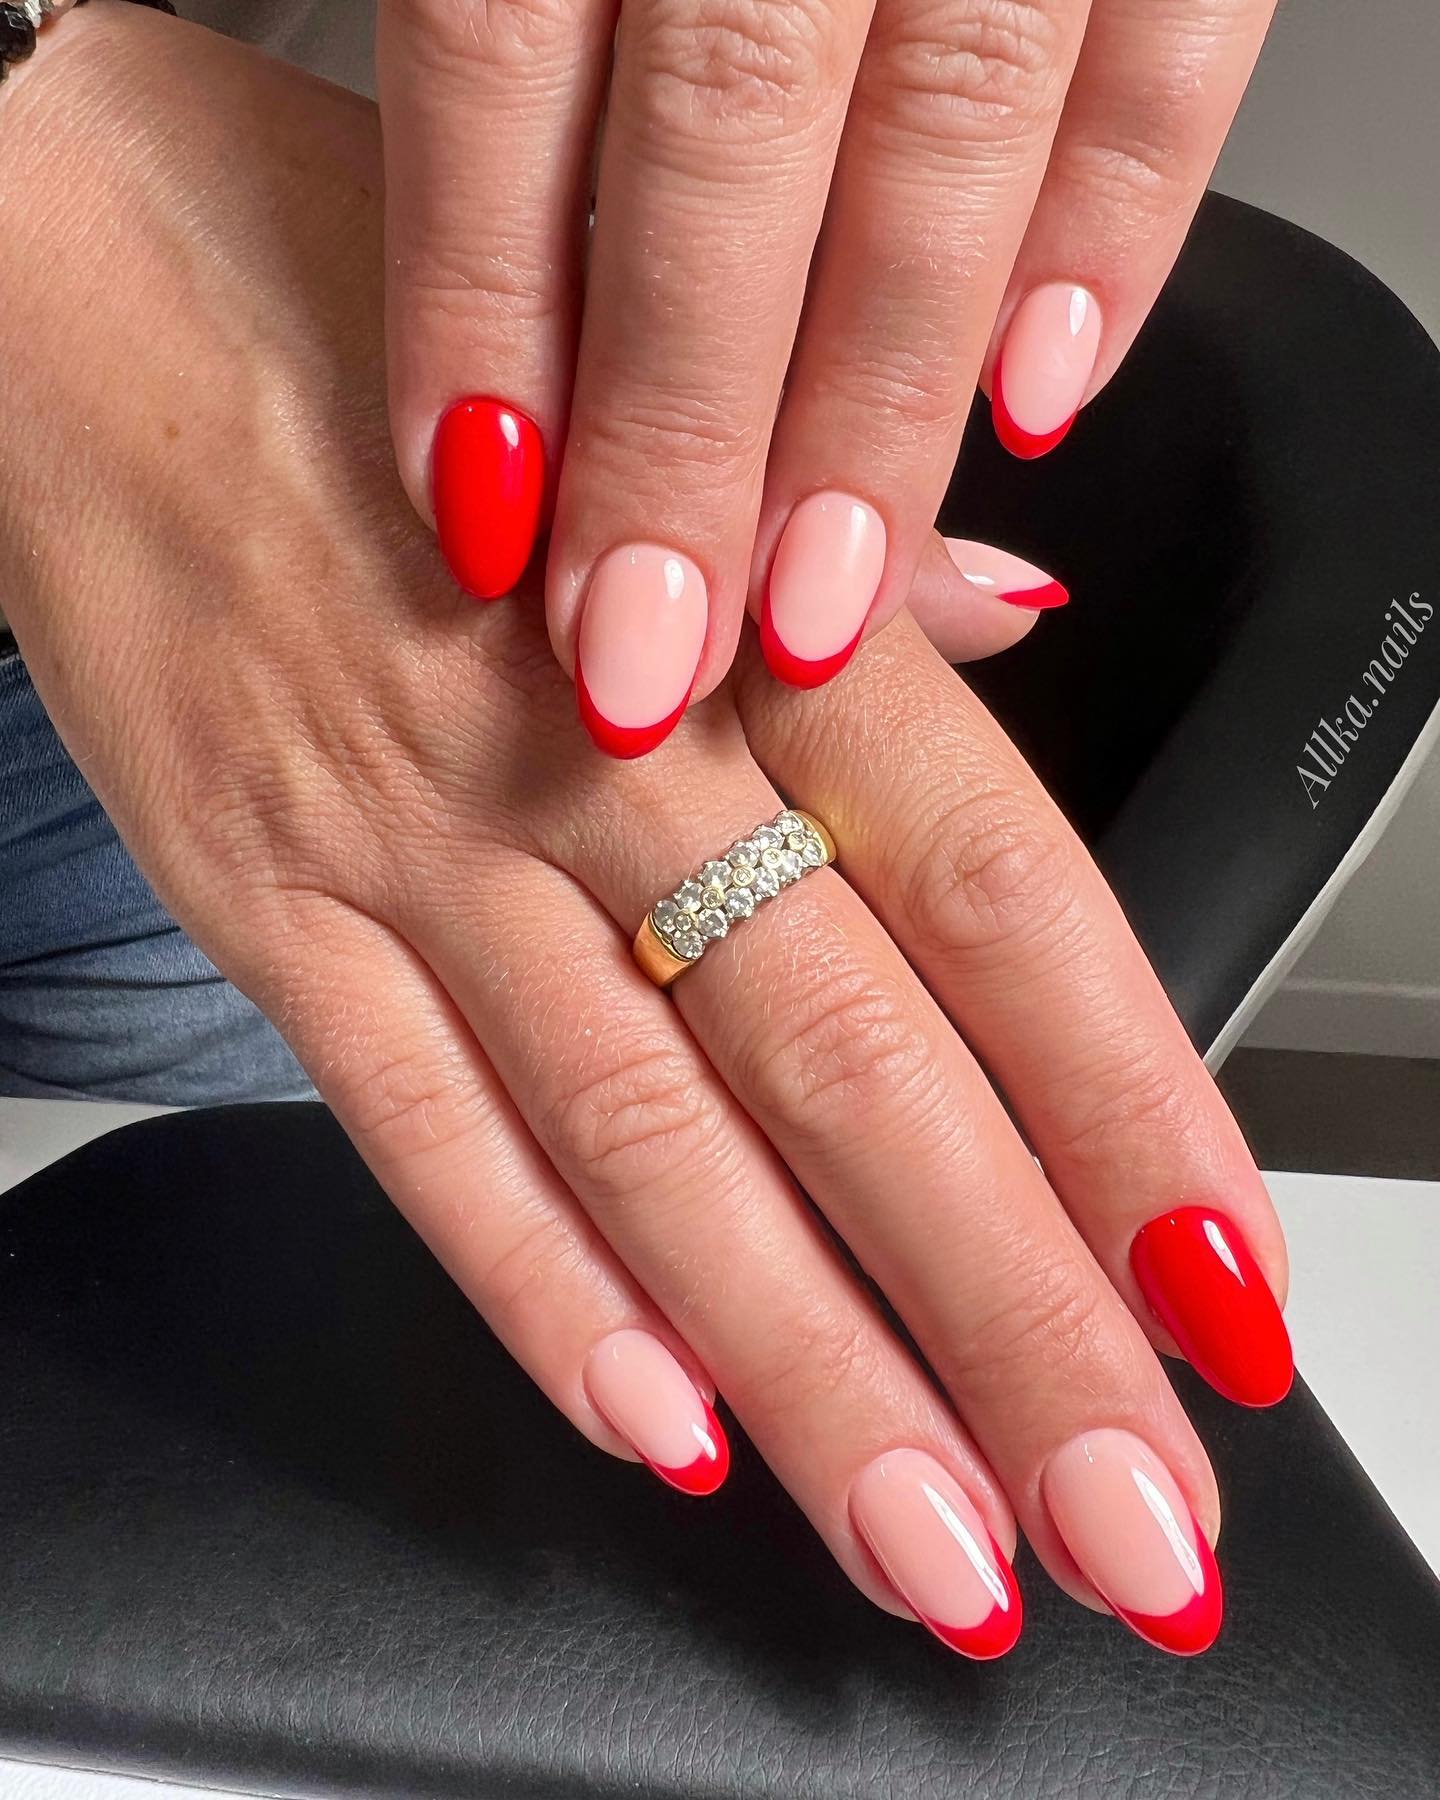 Red and french manicure are great to pair. You can leave out one of your nails and do french to others.